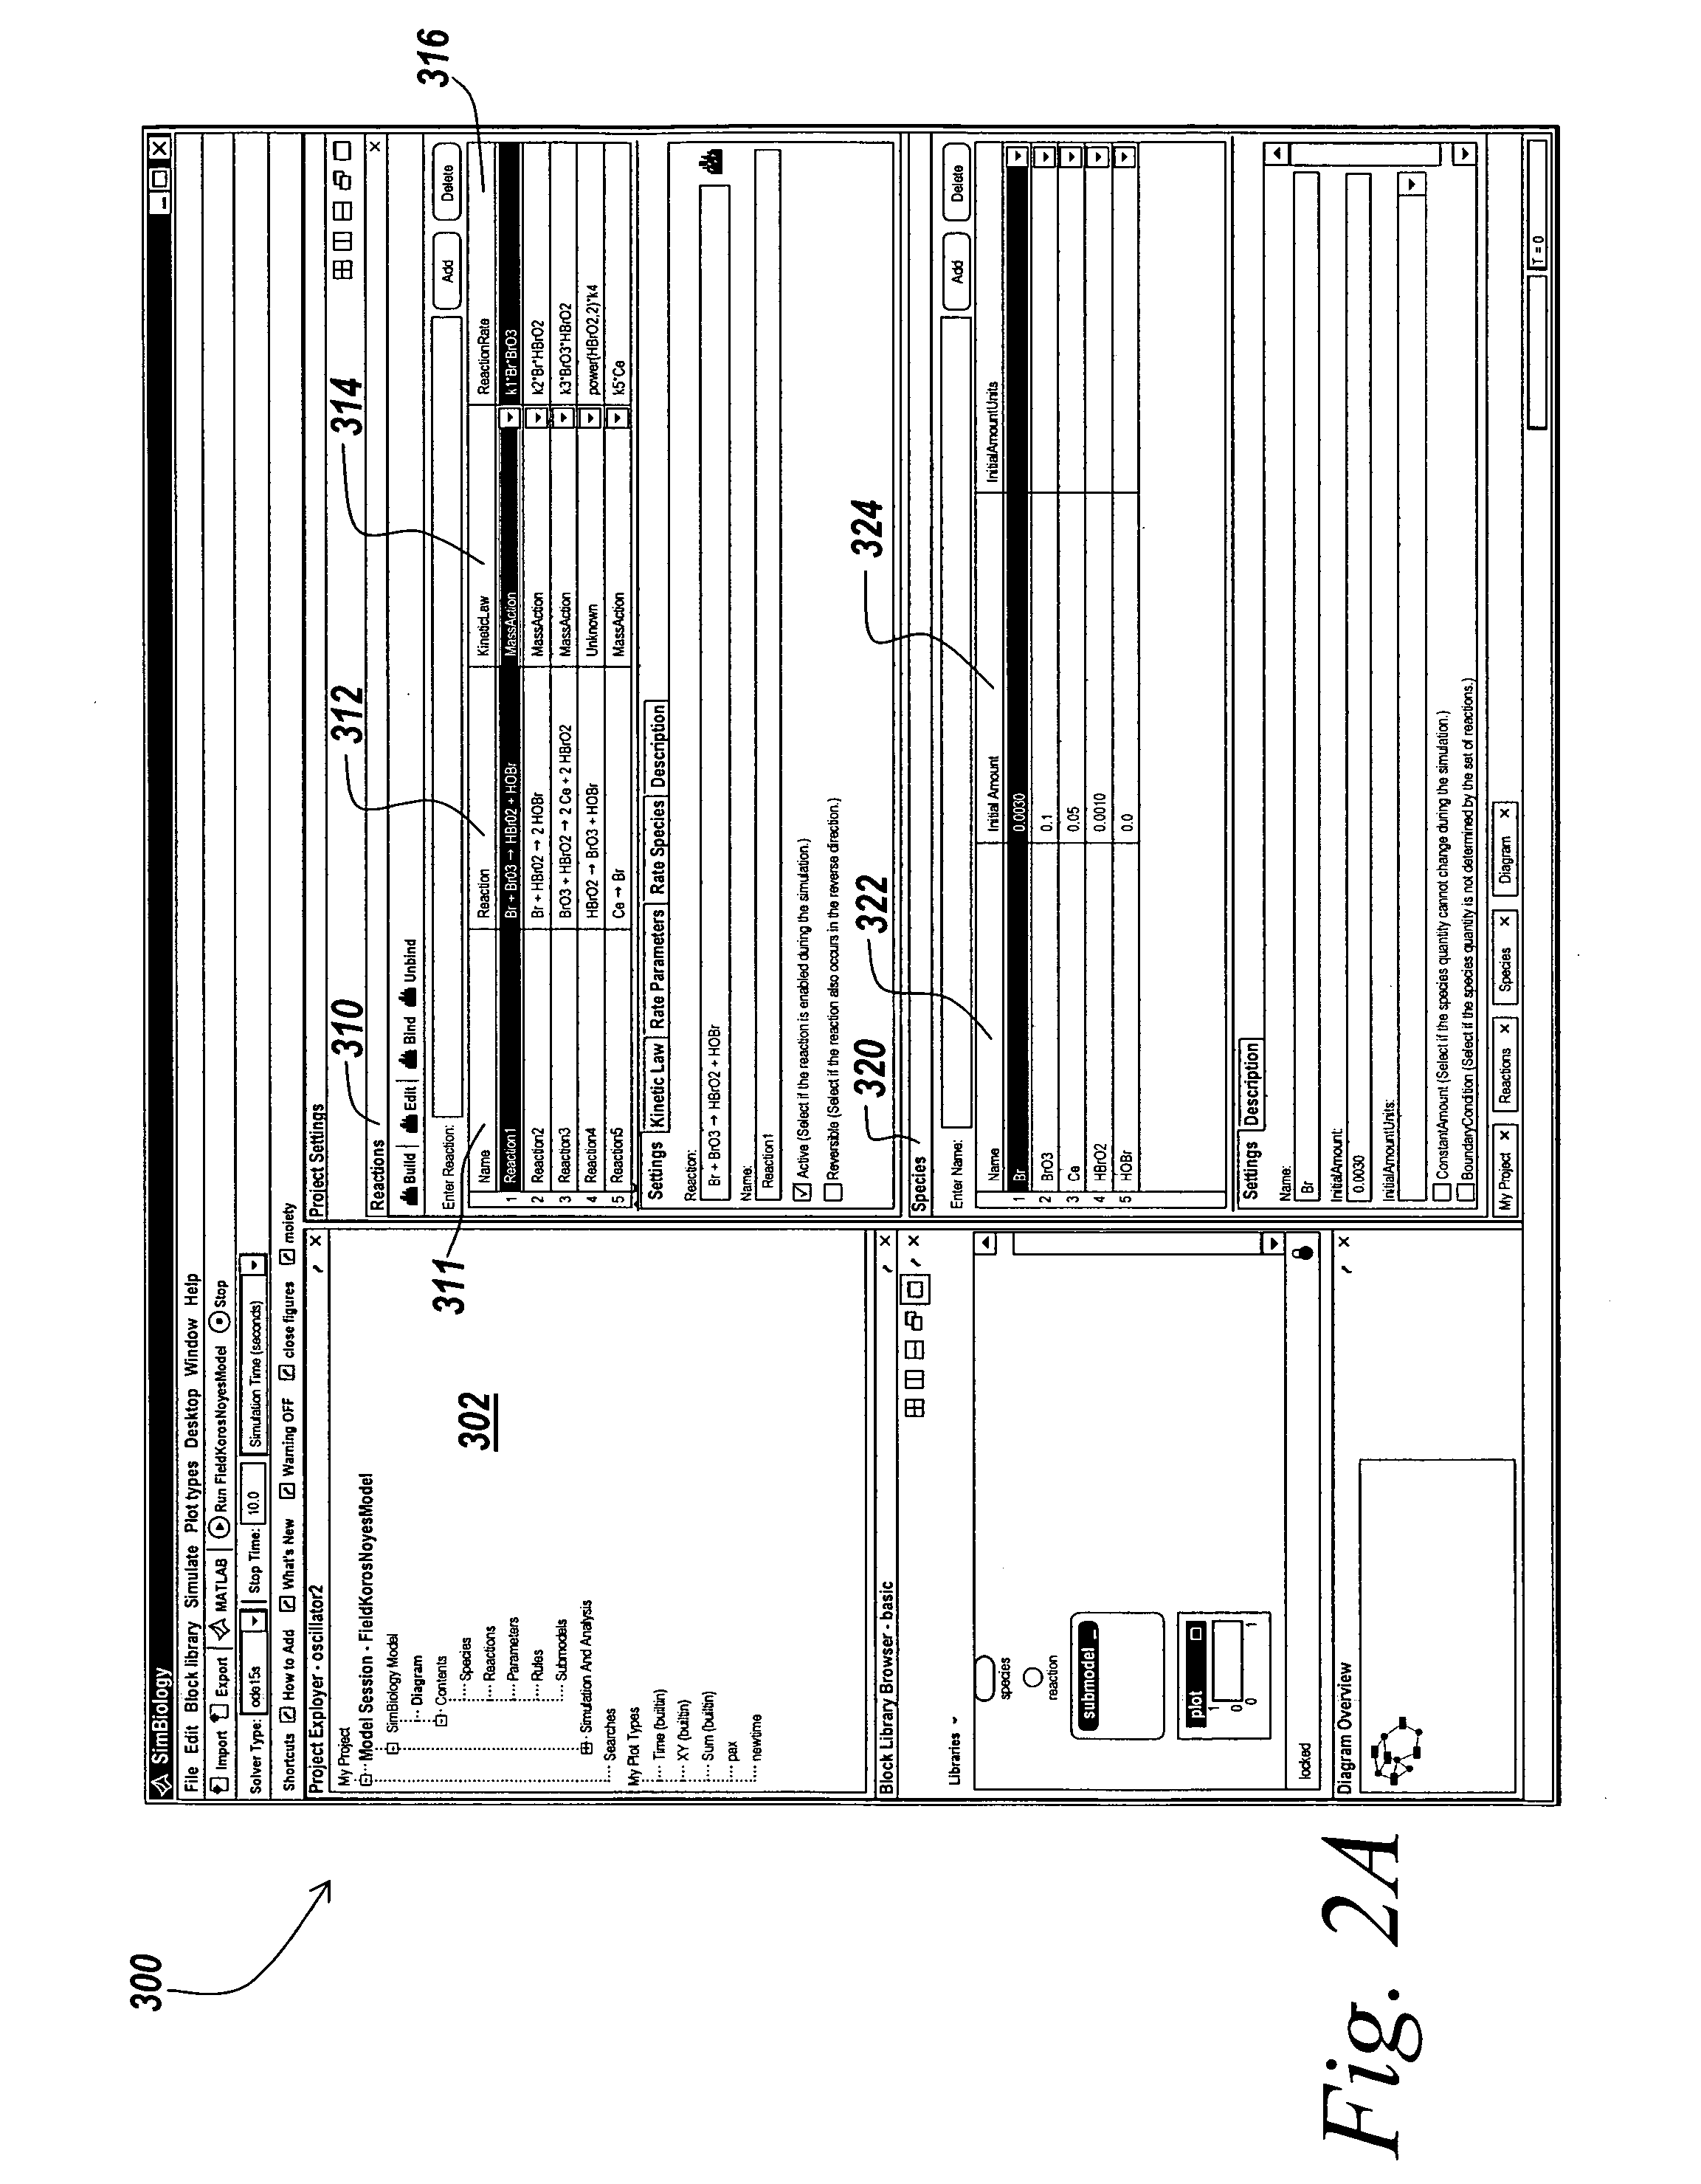 Block diagram explorer in a method and apparatus for integrated modeling, simulation and analysis of chemical and biological systems